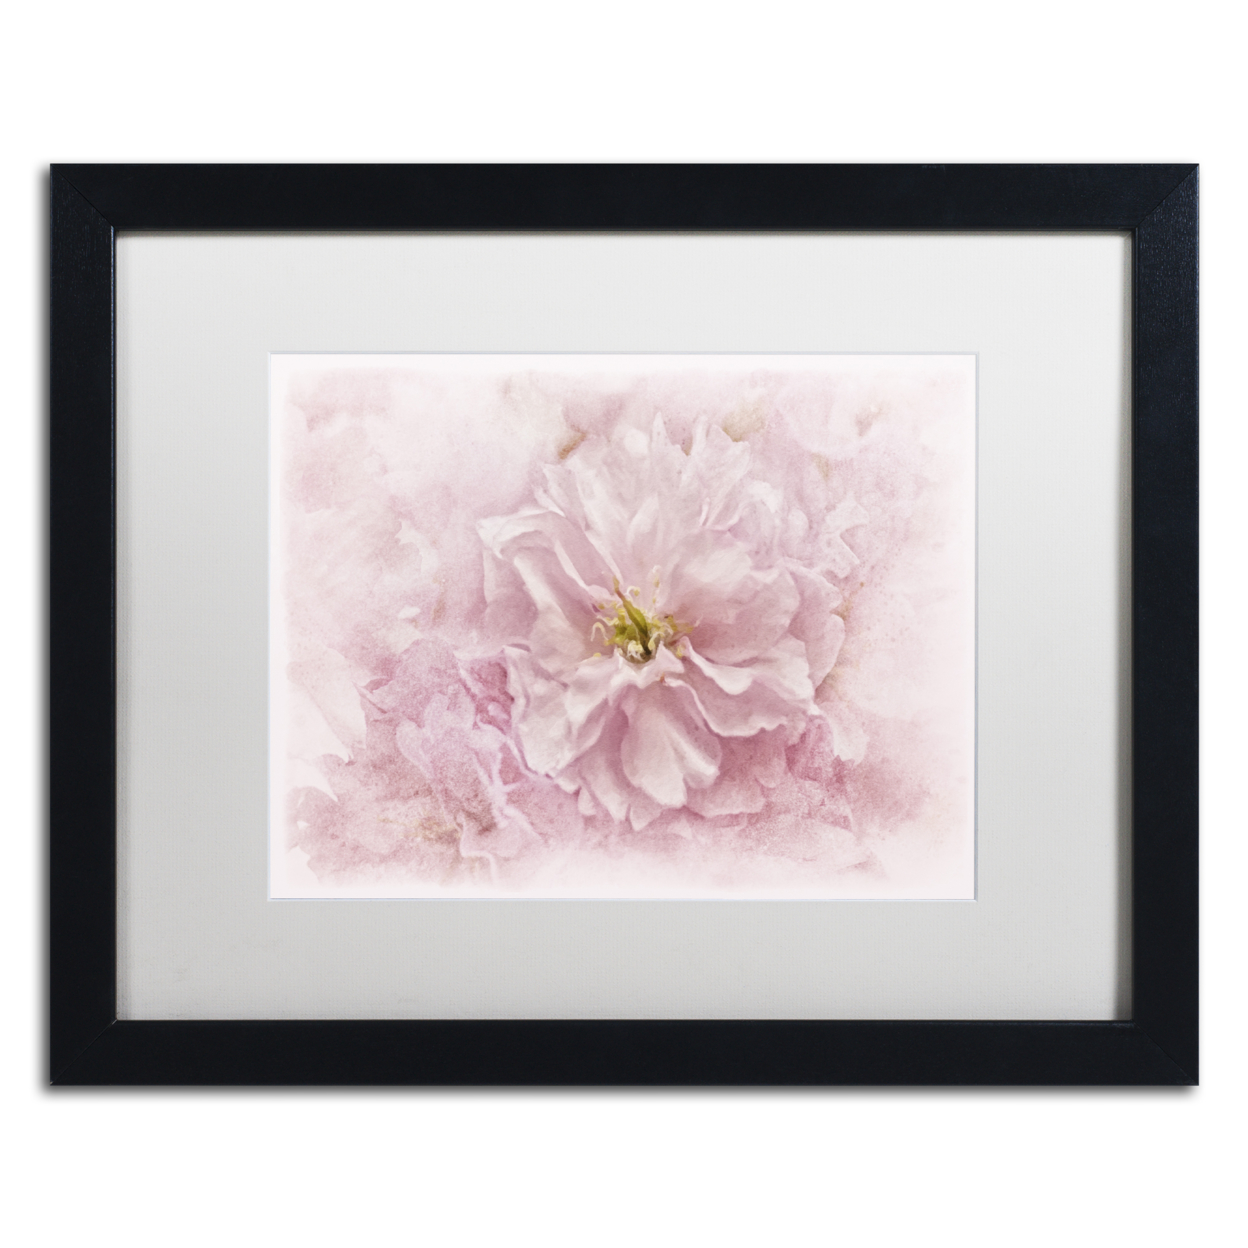 Cora Niele 'Cherry Blossom' Black Wooden Framed Art 18 X 22 Inches